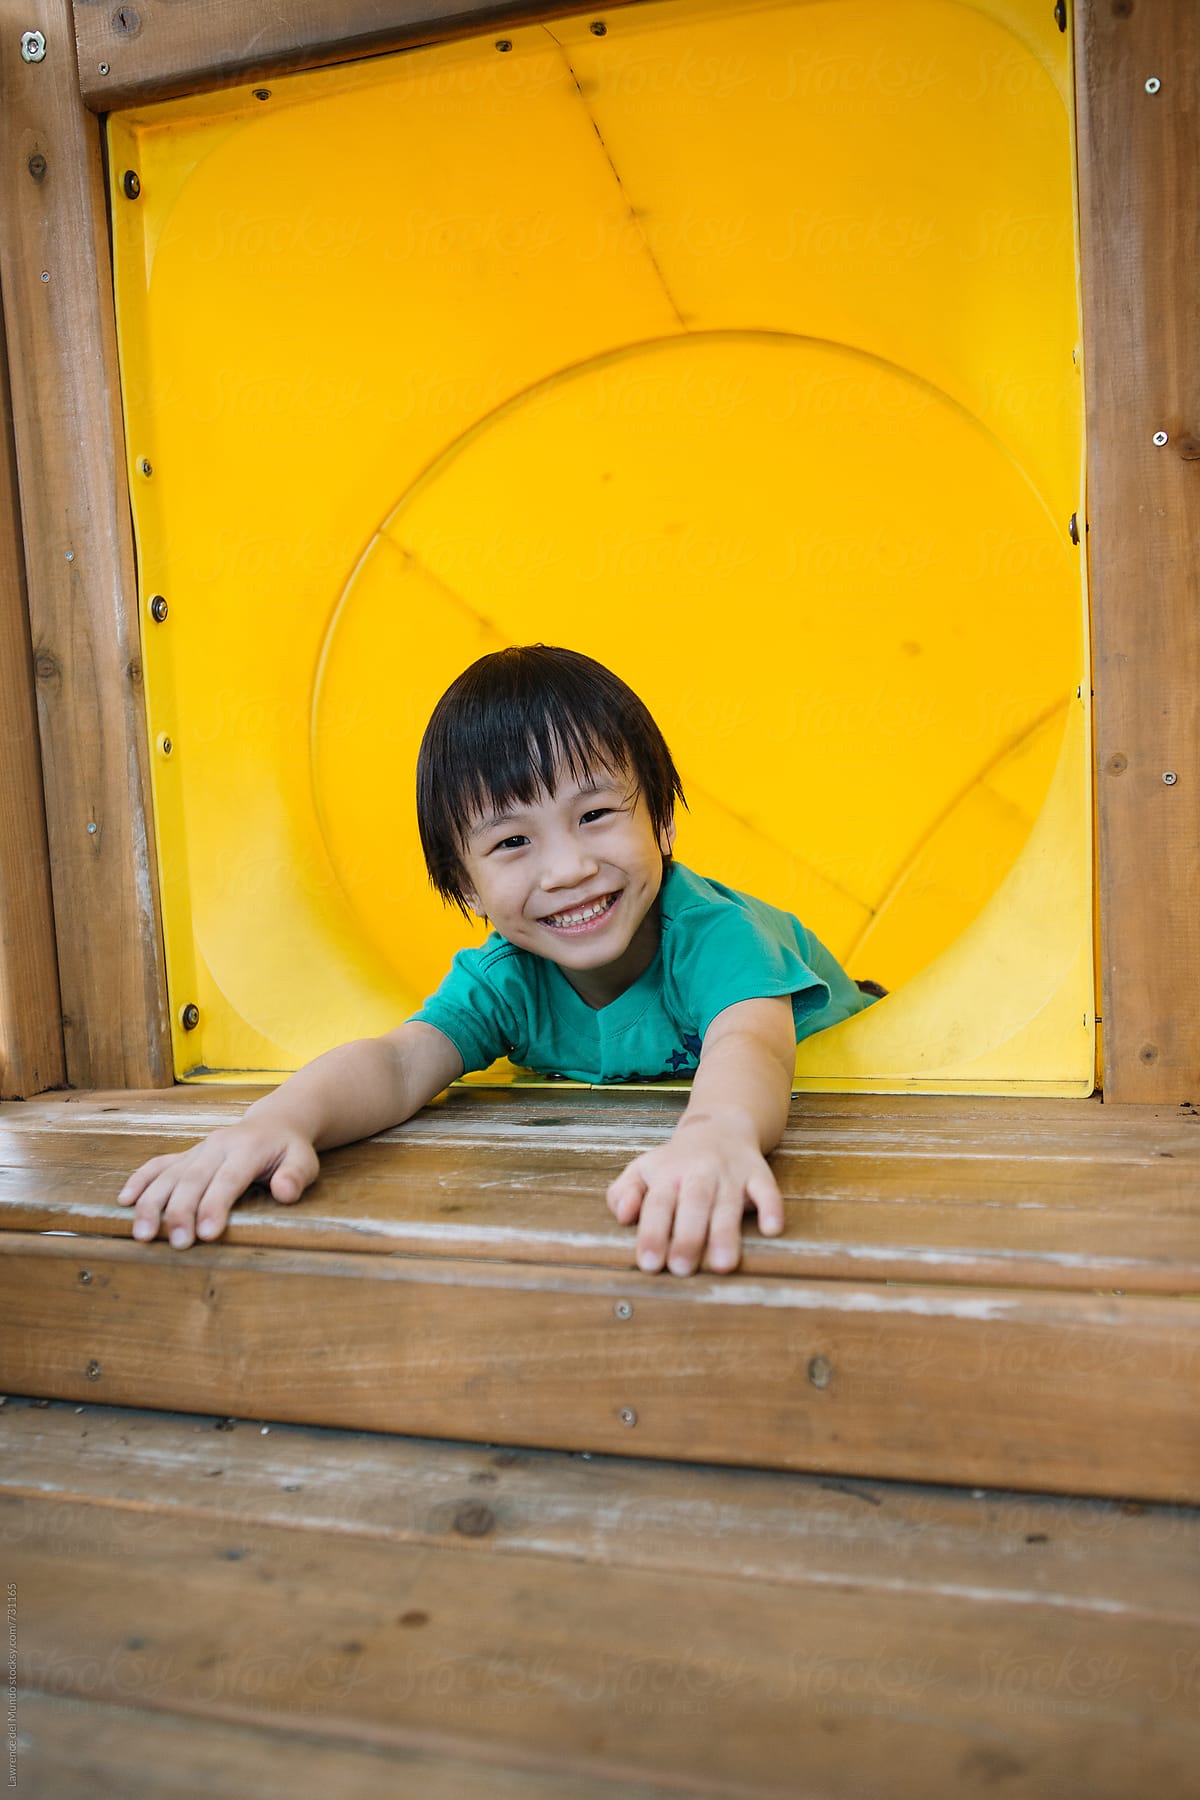 A young kid is all smiles because he is about to go down the slide tunnel